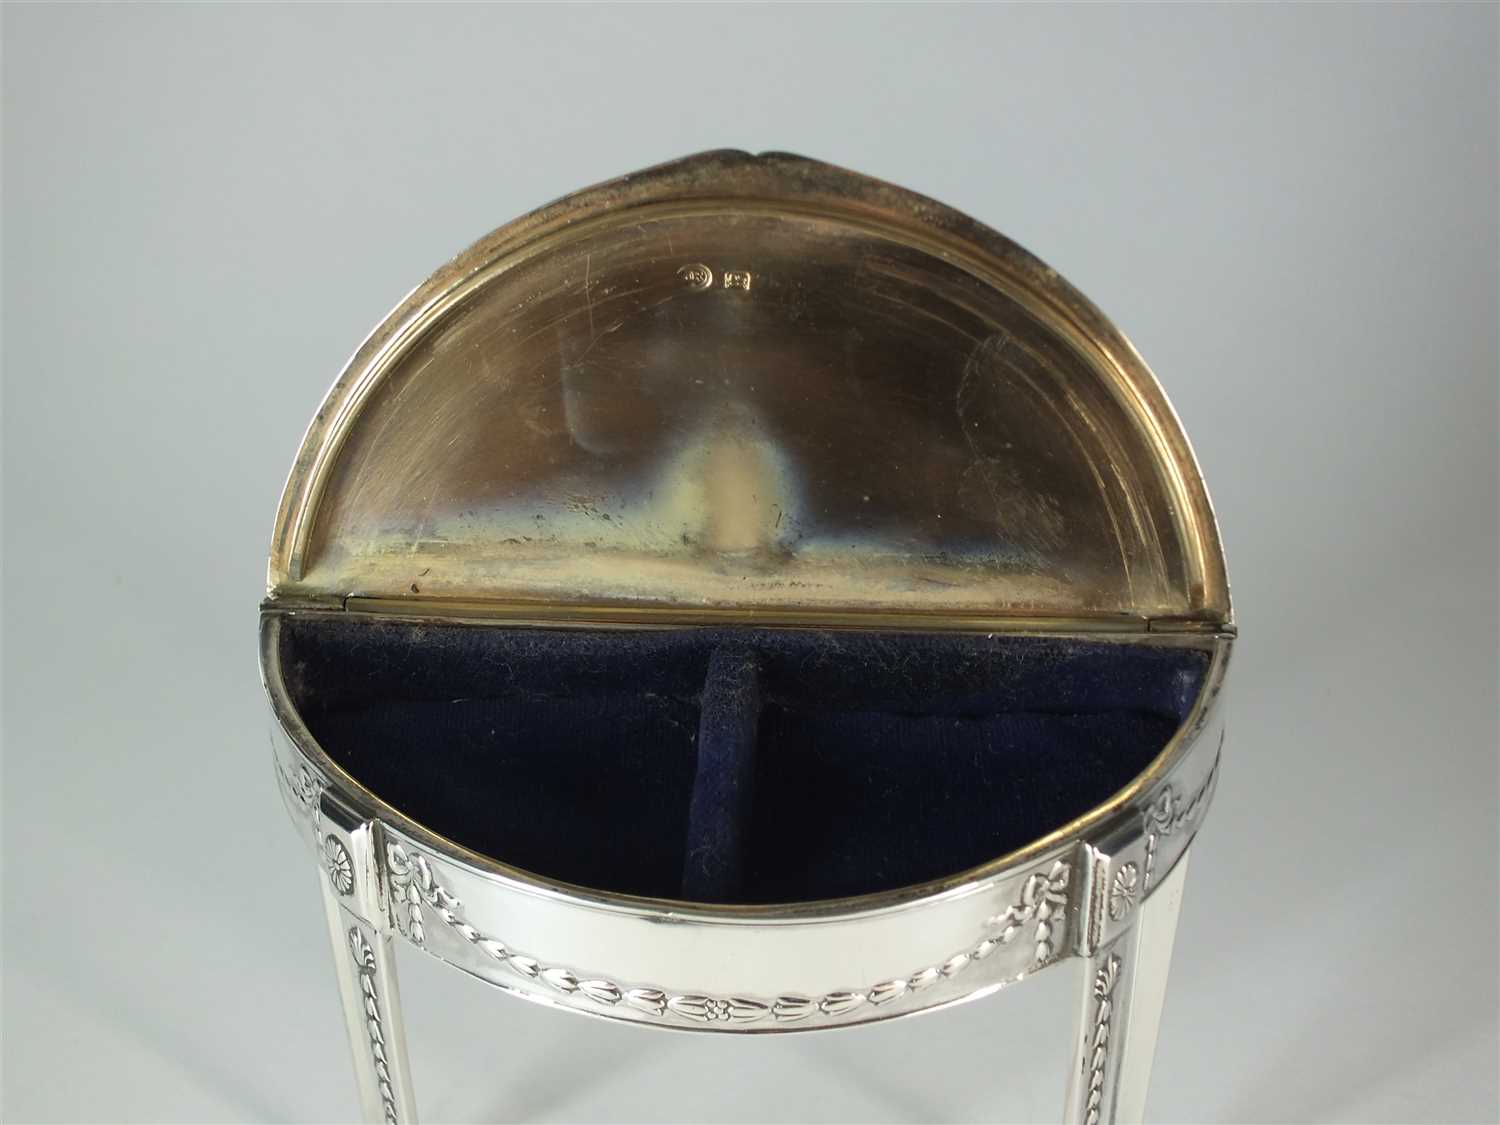 An early 20th century novelty silver ring box - Image 4 of 6